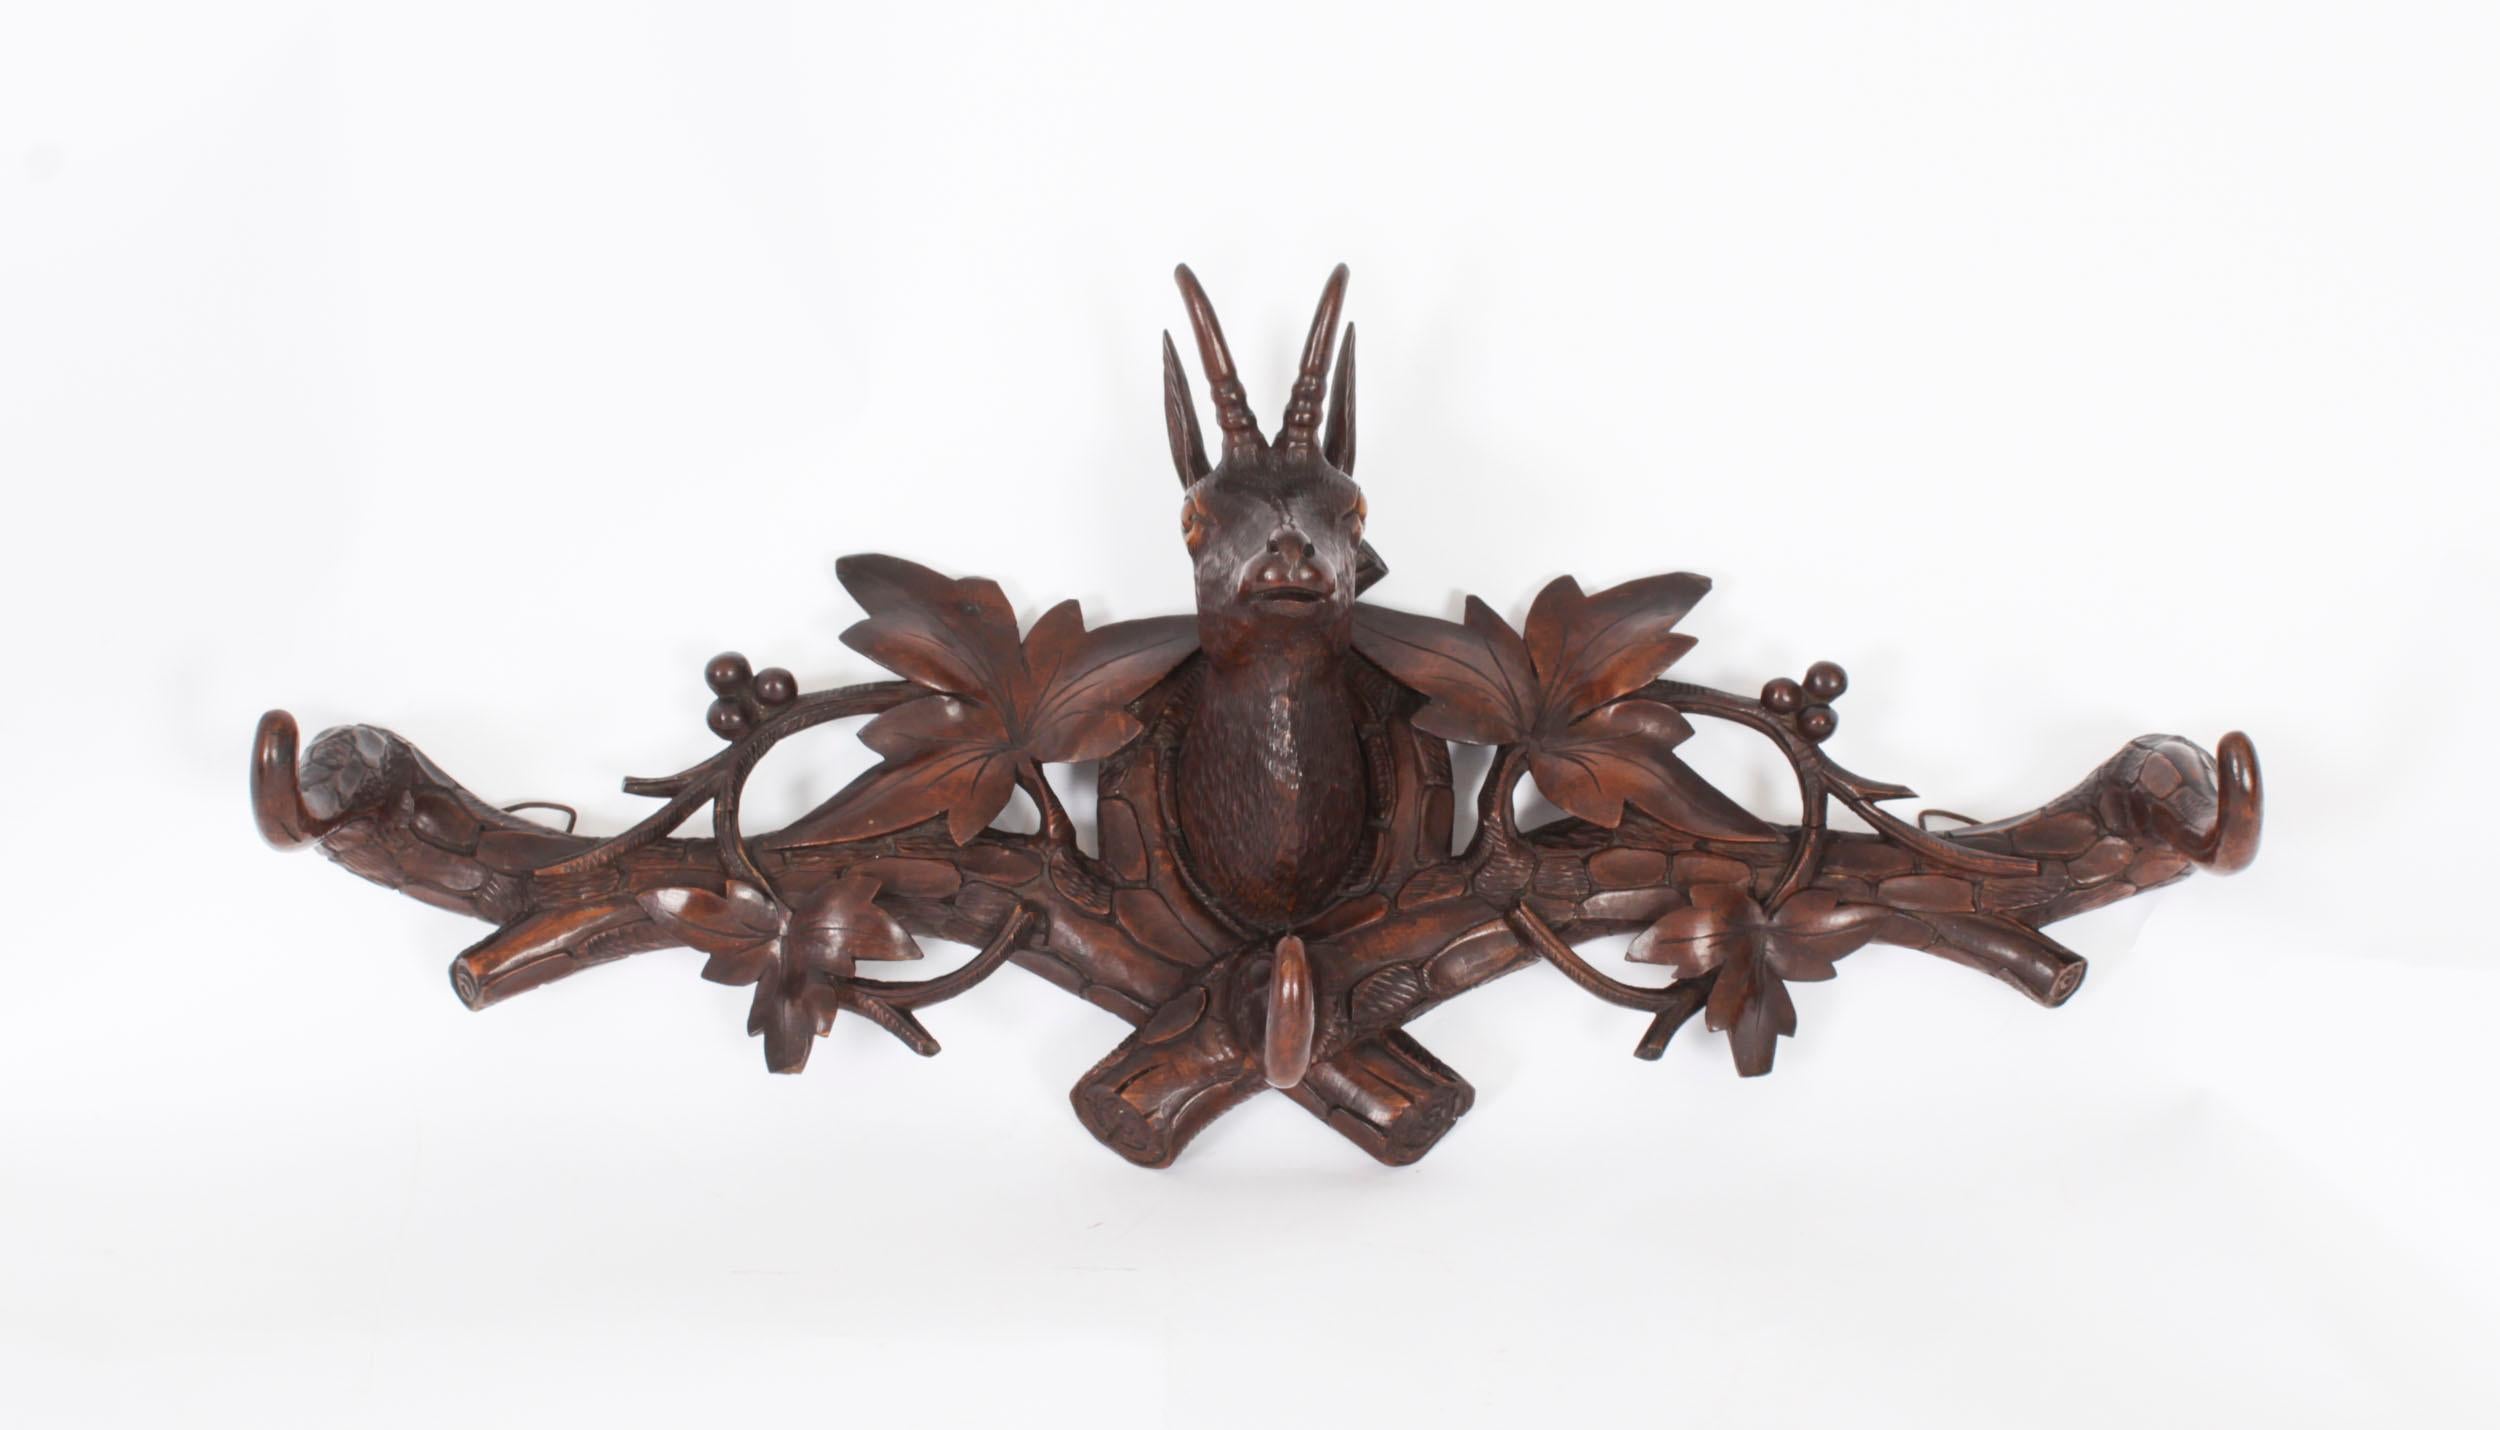 This is a stunning and rare Black Forest wall mounted carved deer's head hat and coat rack with glass eyes and with branch and leaf decoration, Circa 1880 in date.

This gorgeous antique was painstakingly hand-carved from Black Forest linden